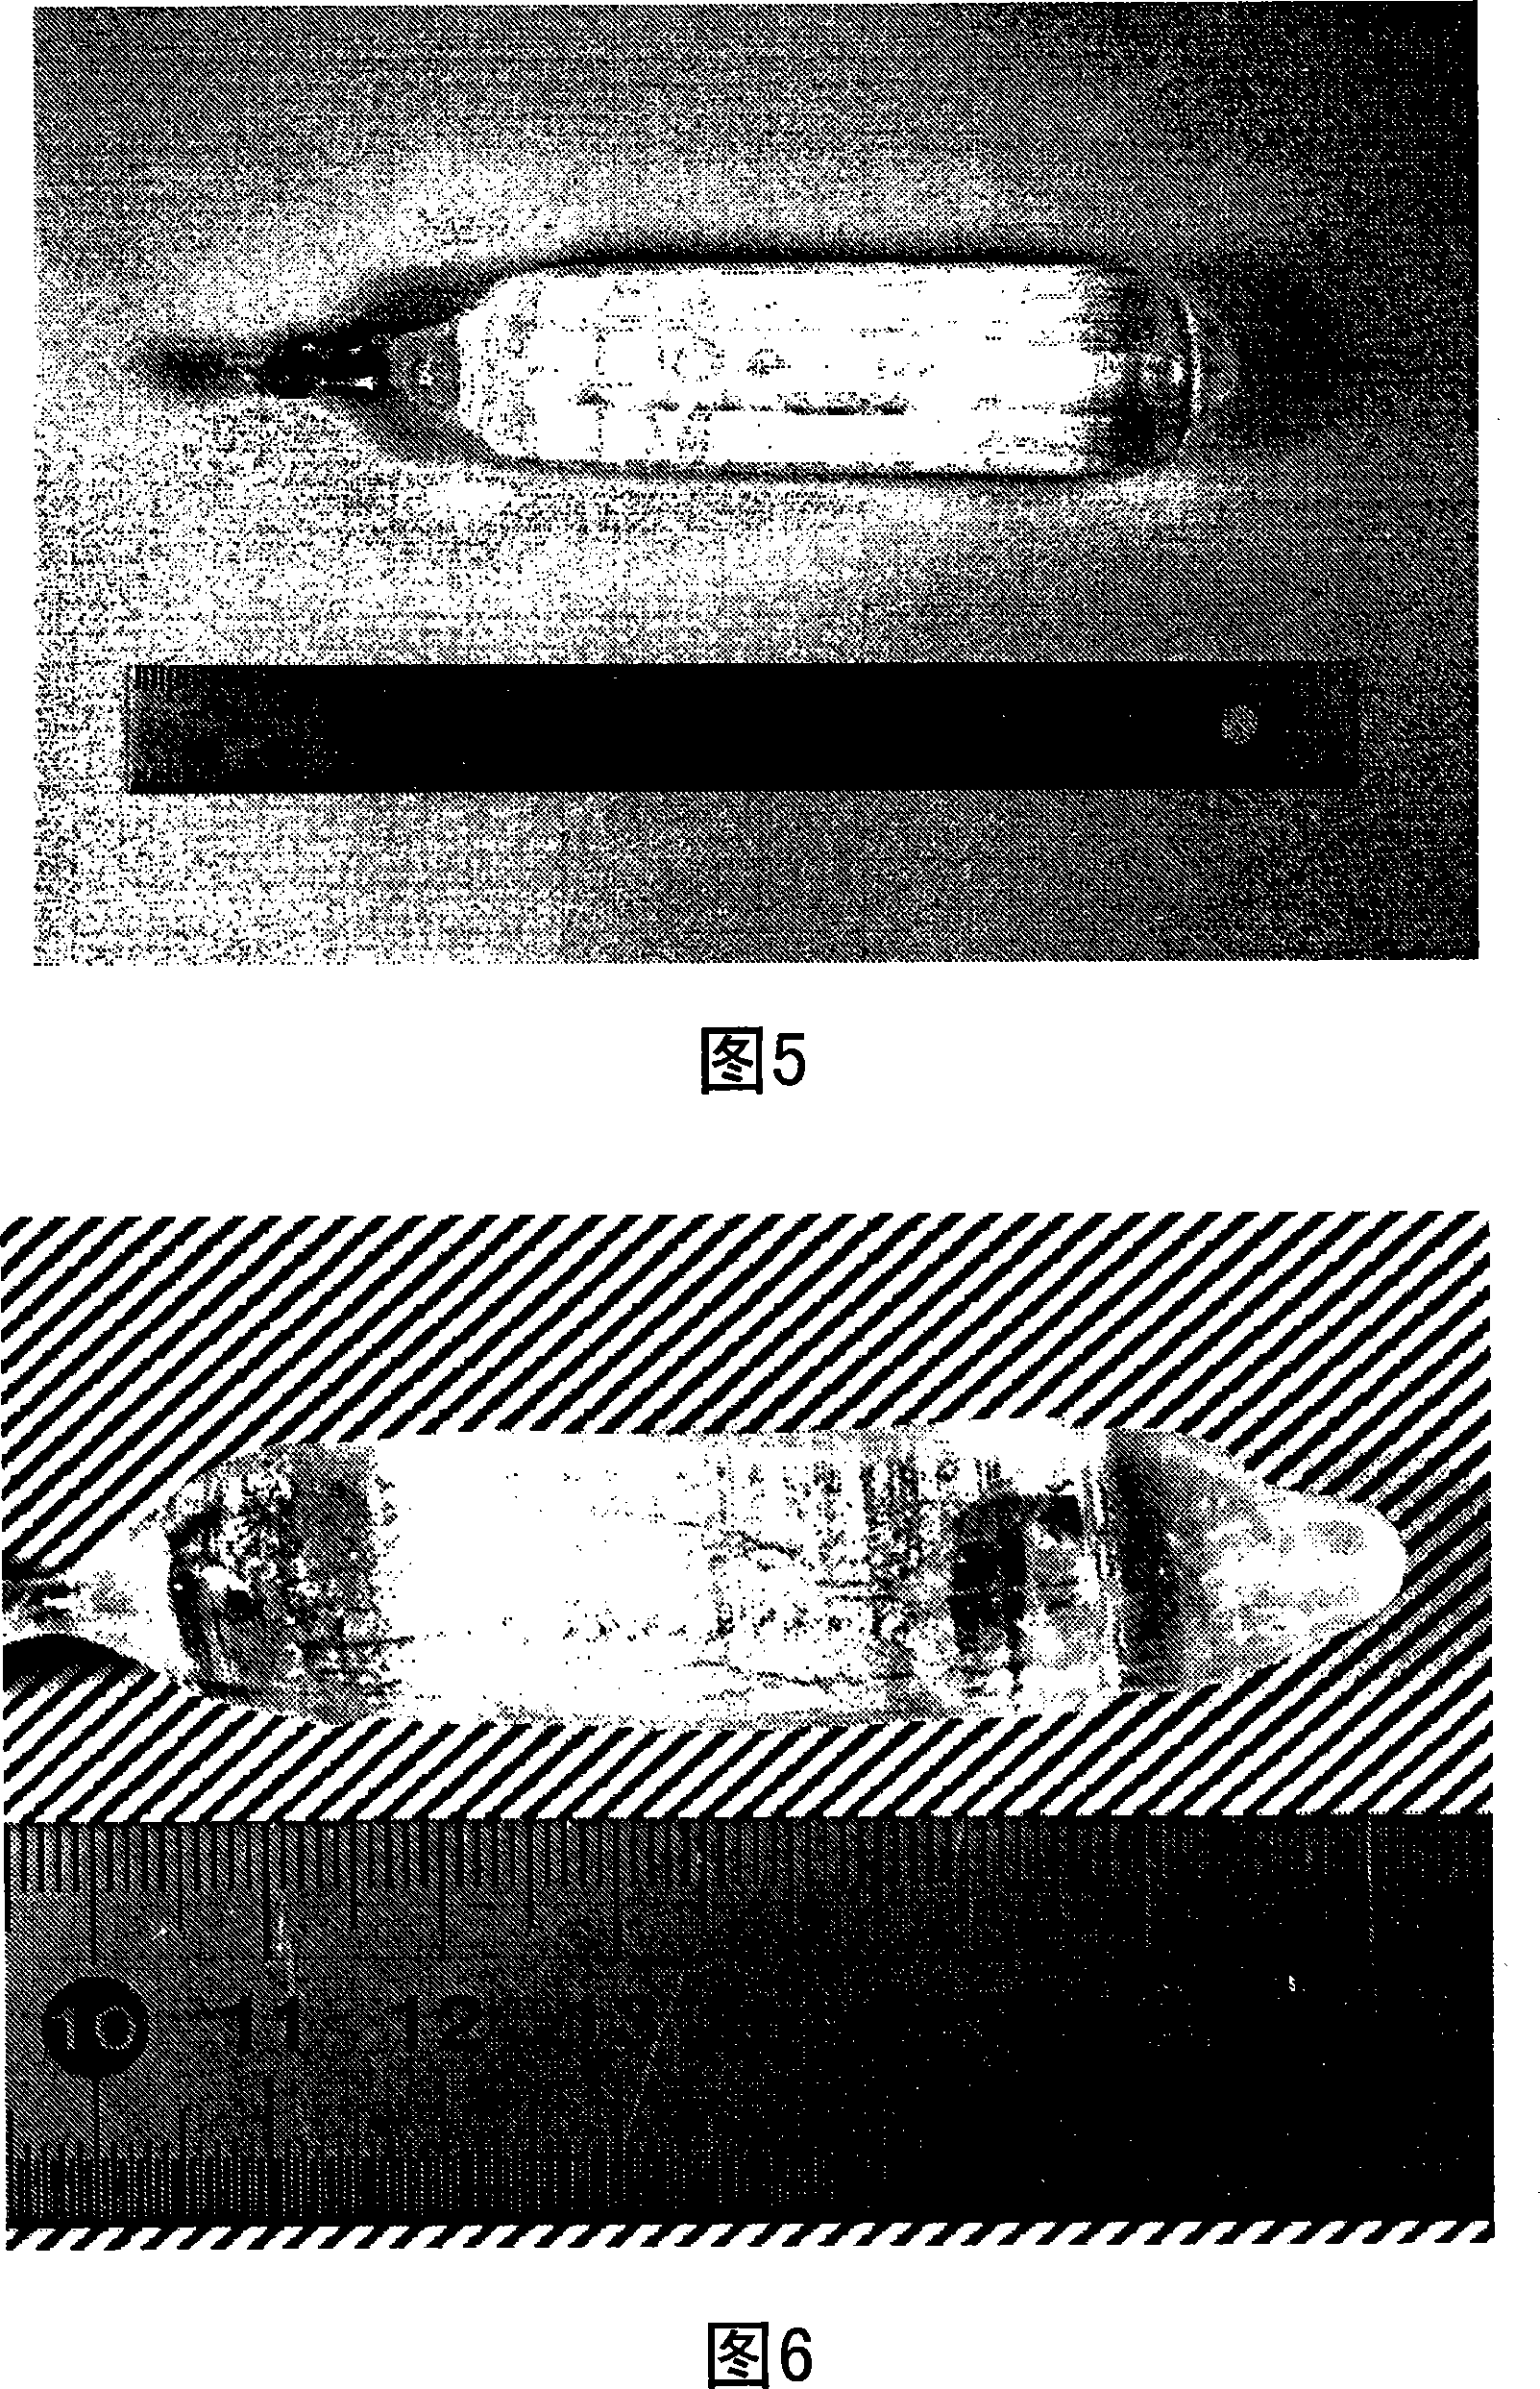 Pr-containing single crystal for scintillator, process for producing the same, radiation detector and inspection apparatus